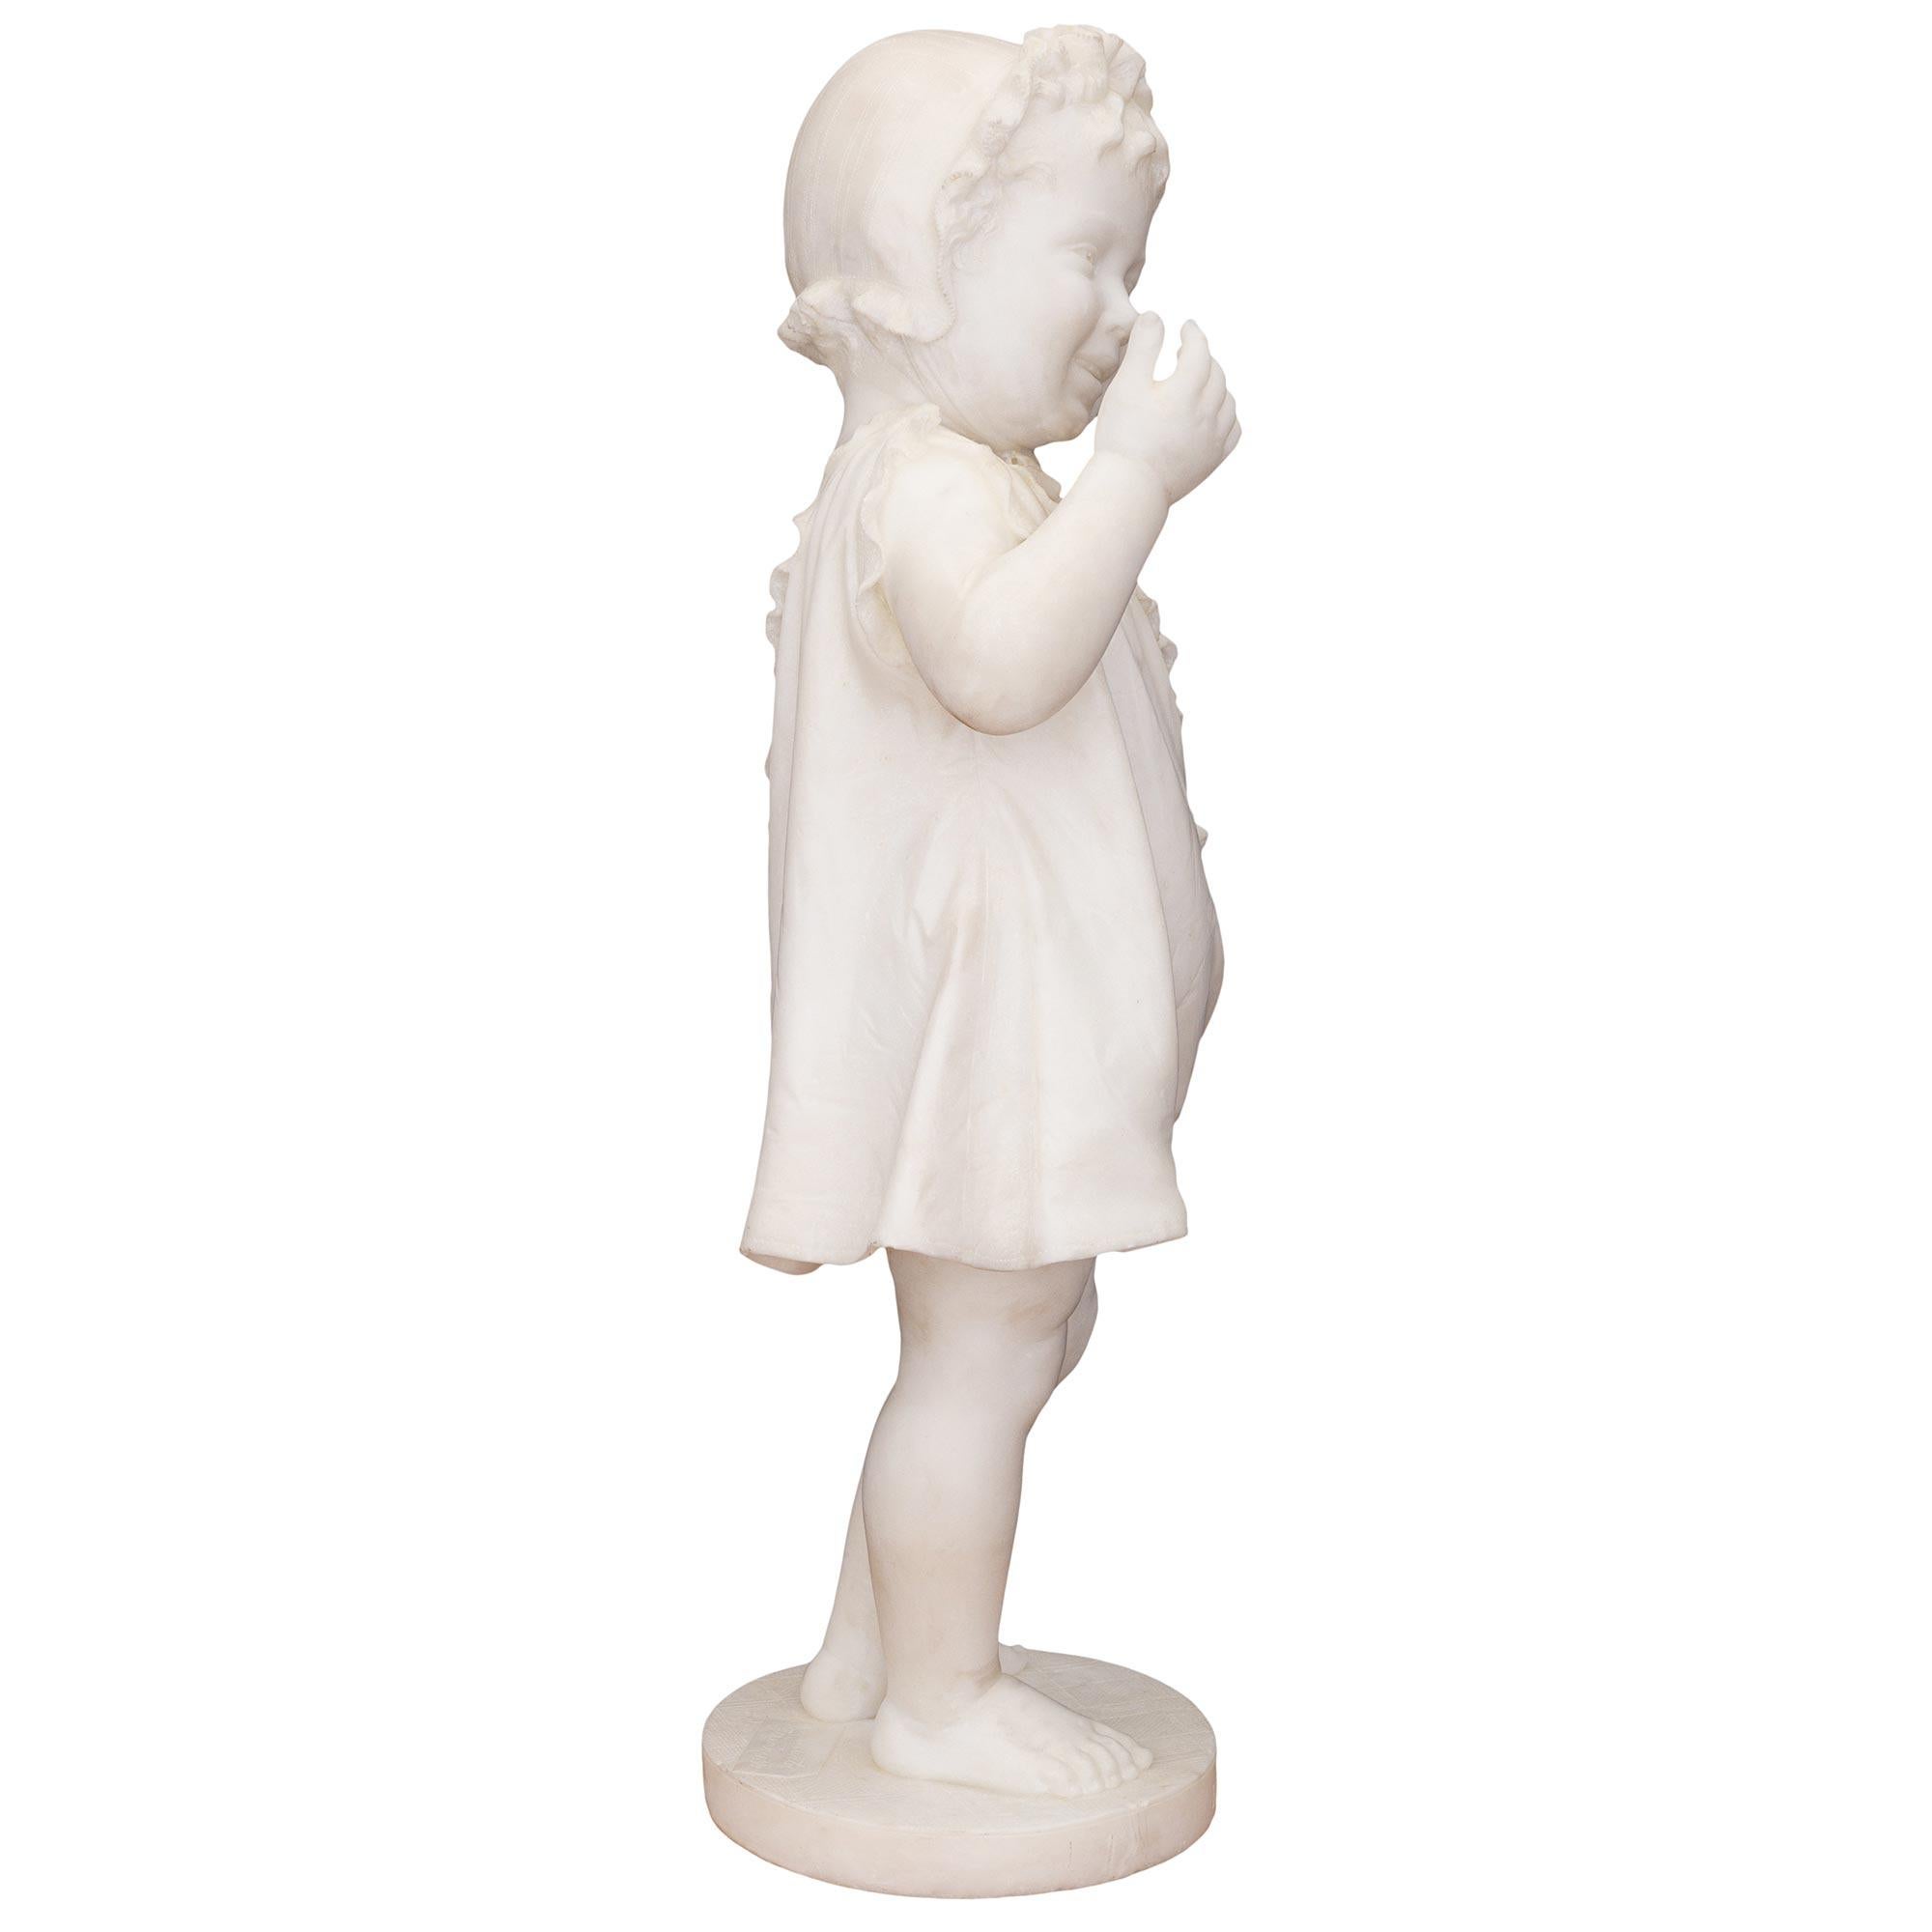 Italian 19th Century White Carrara Marble Statue of a Young Girl In Good Condition For Sale In West Palm Beach, FL